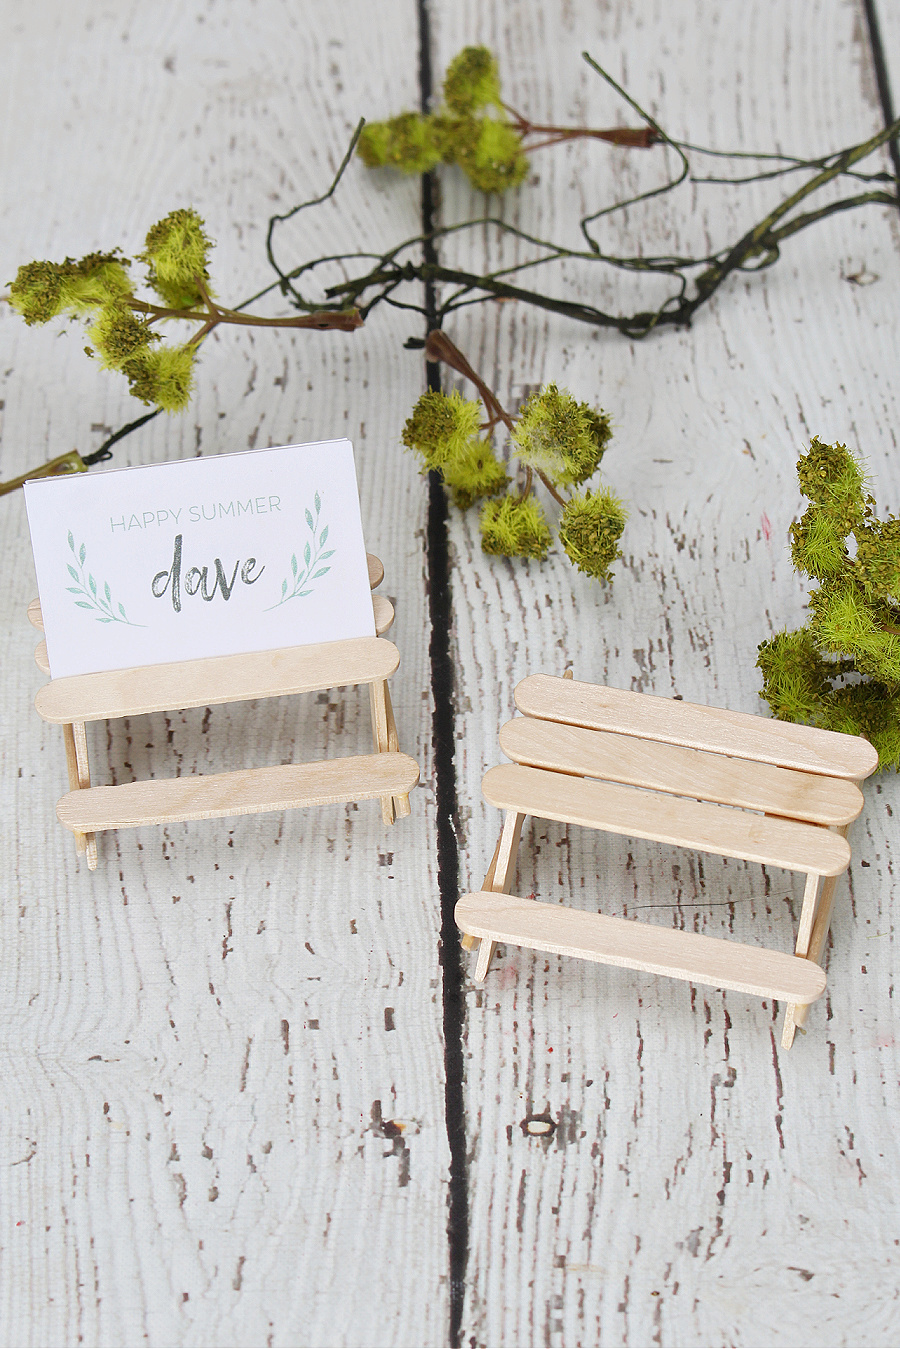 Cute popsicle stick picnic tables used as a place card holder.